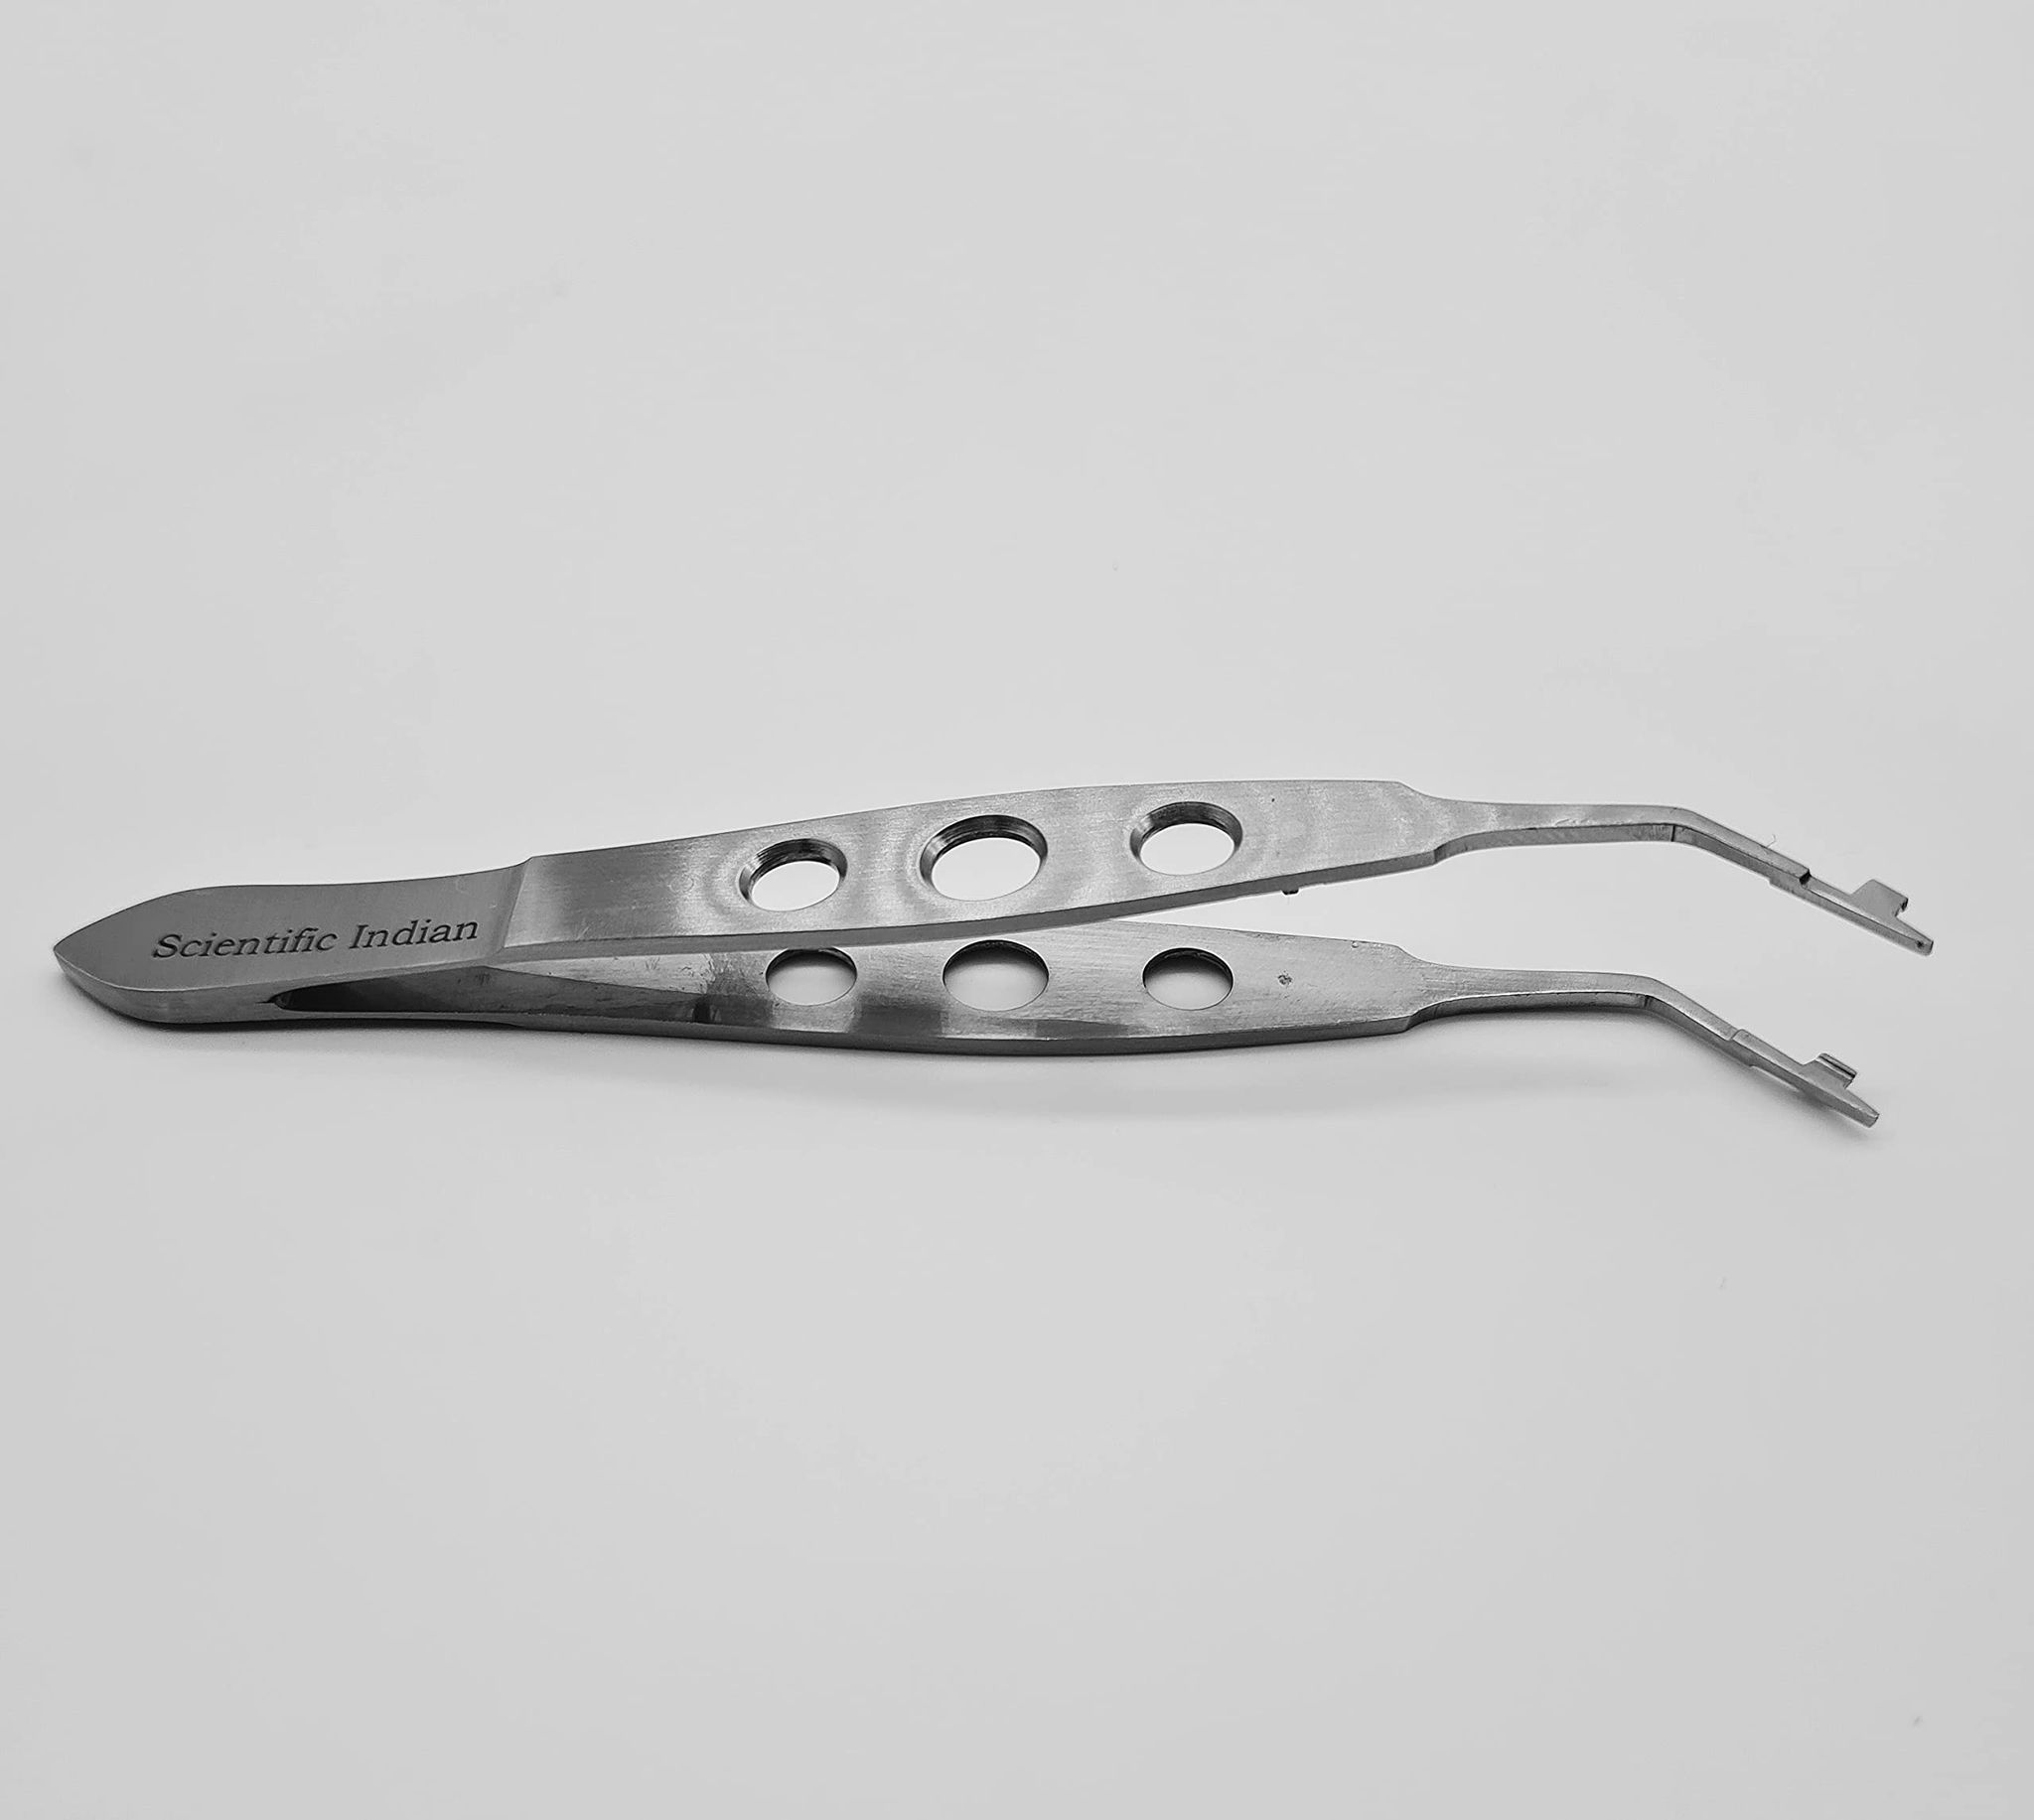 Livernois Lens ( IOL) Folding Ophthalmic  Medical Forceps Stainless Steel - Scientific Indian